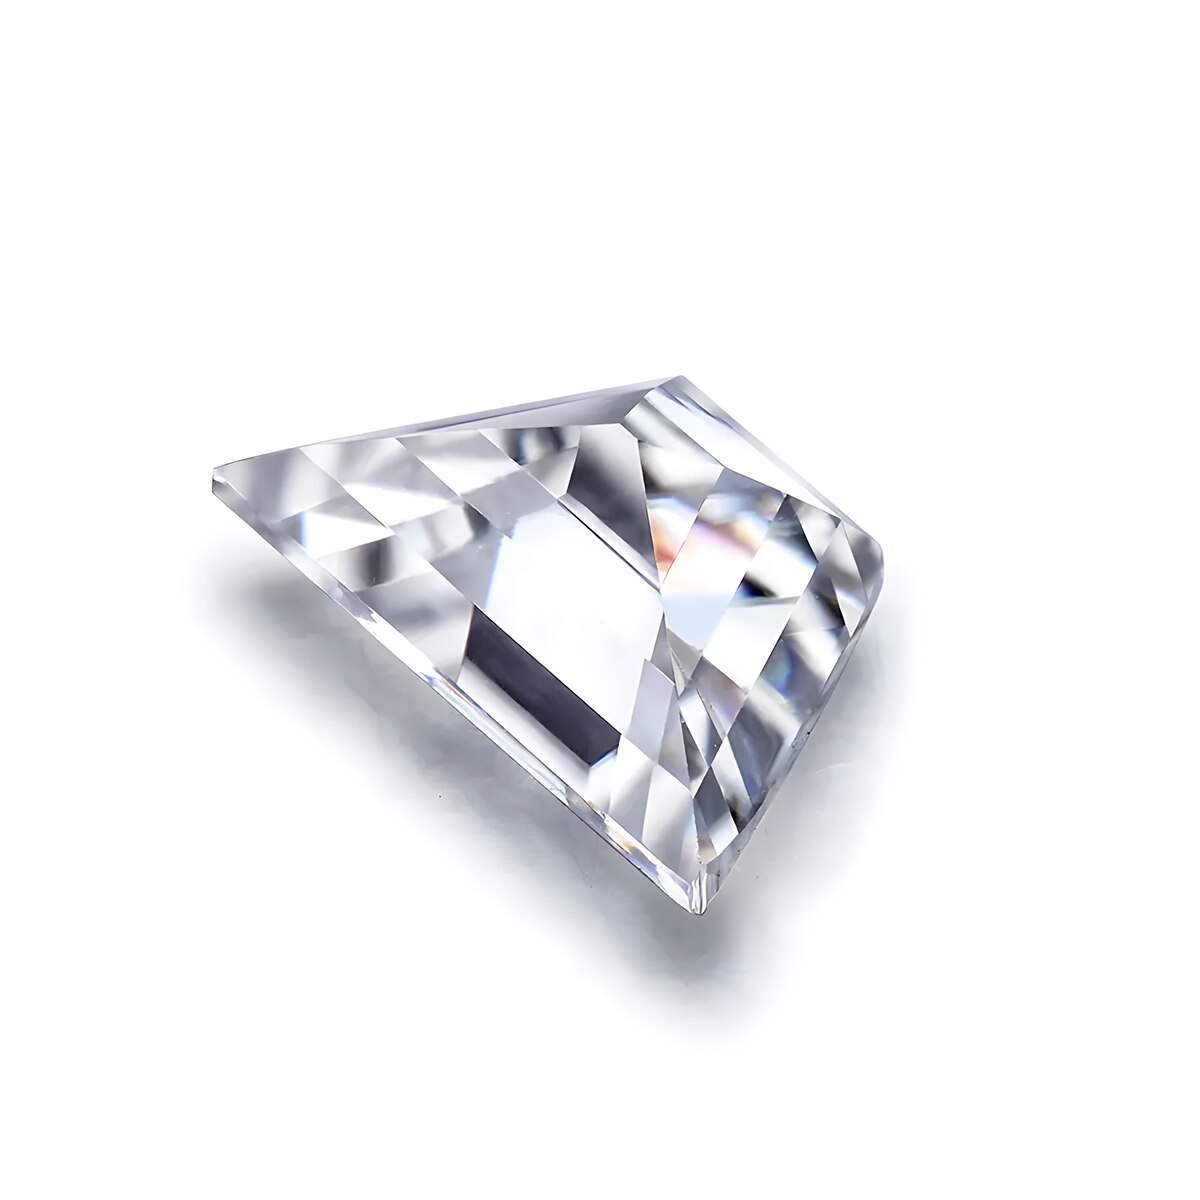 Trapezoid Cut. Loose Moissanite Gemstone. From 0.20 to 0.80 Carat. D VVS1.